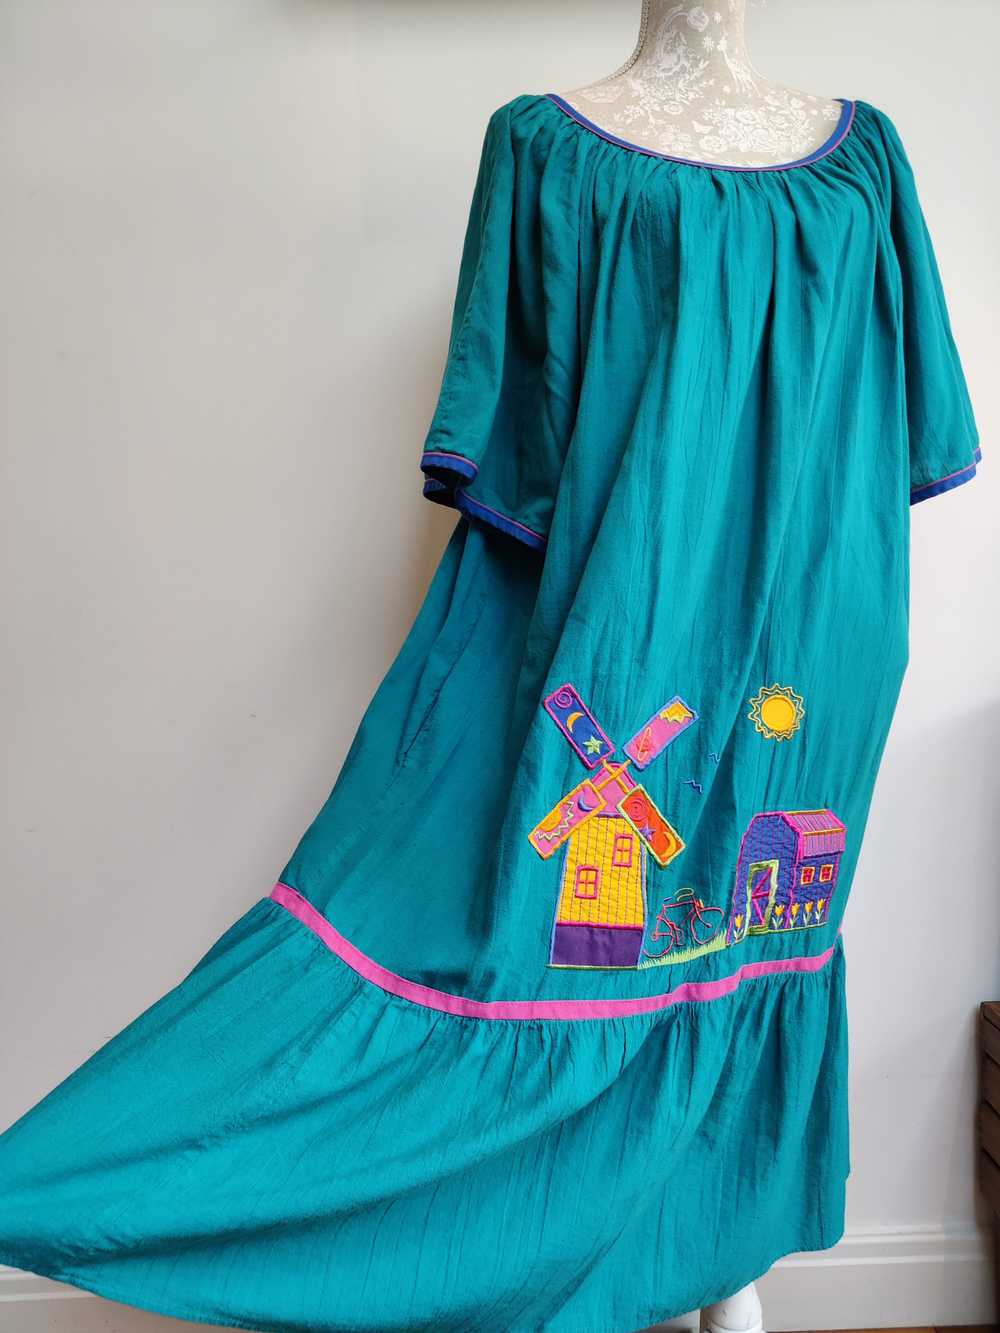 Stunning 80s Appel patio dress with novelty windm… - image 7